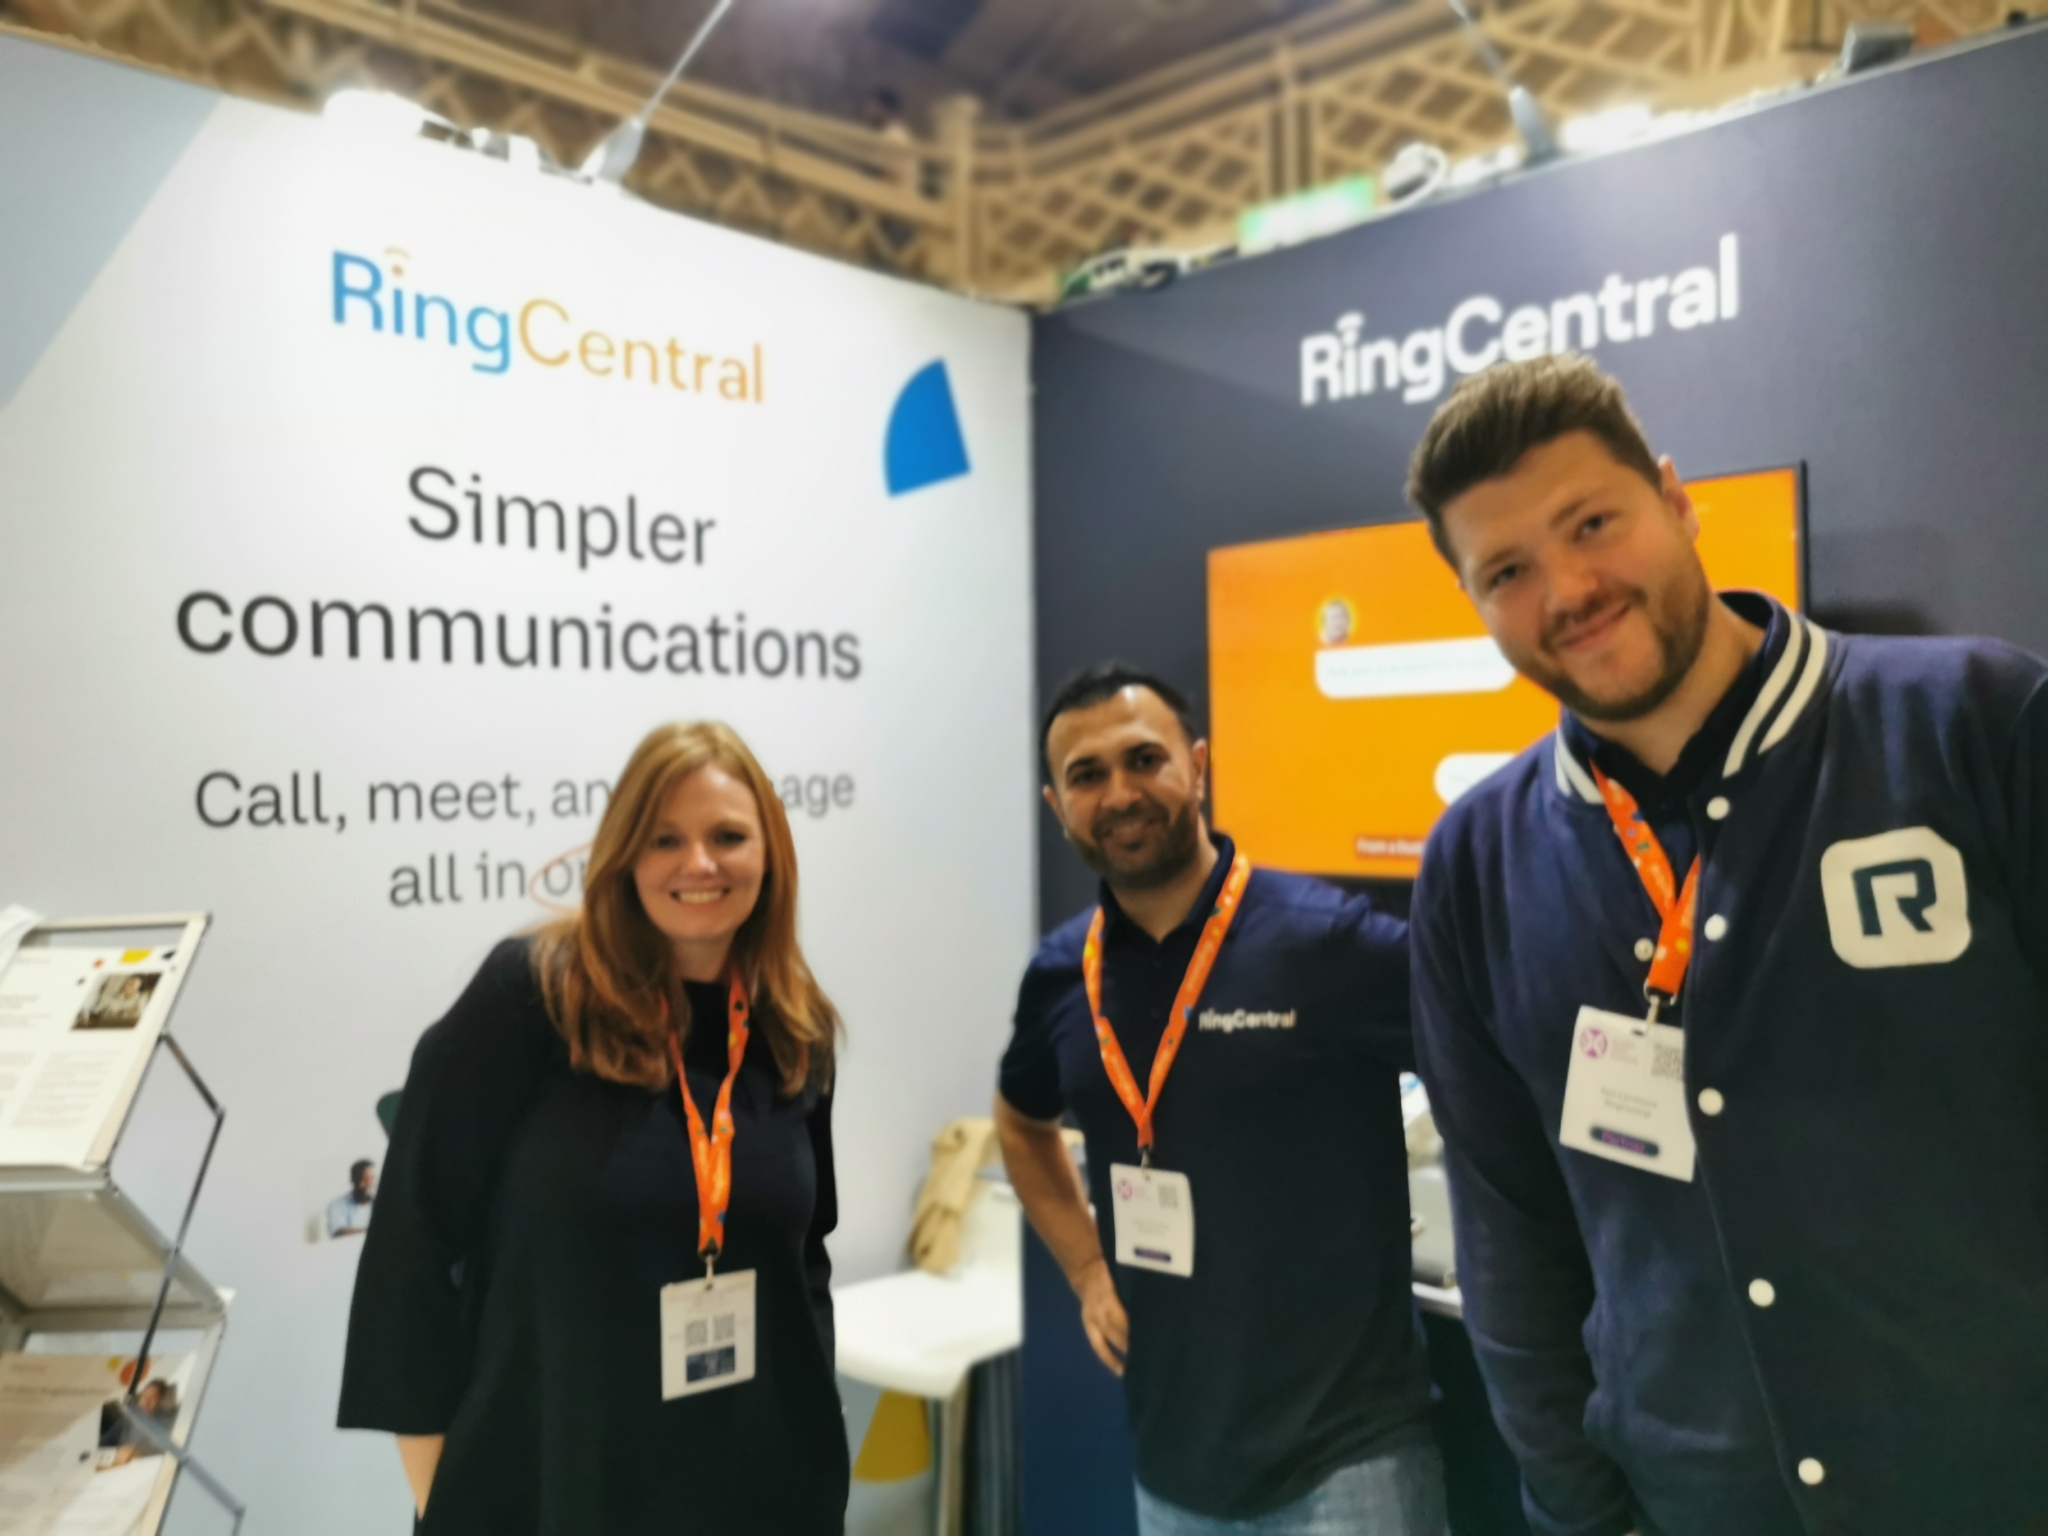 Three people smiling for the camera in front of the RingCentral stand